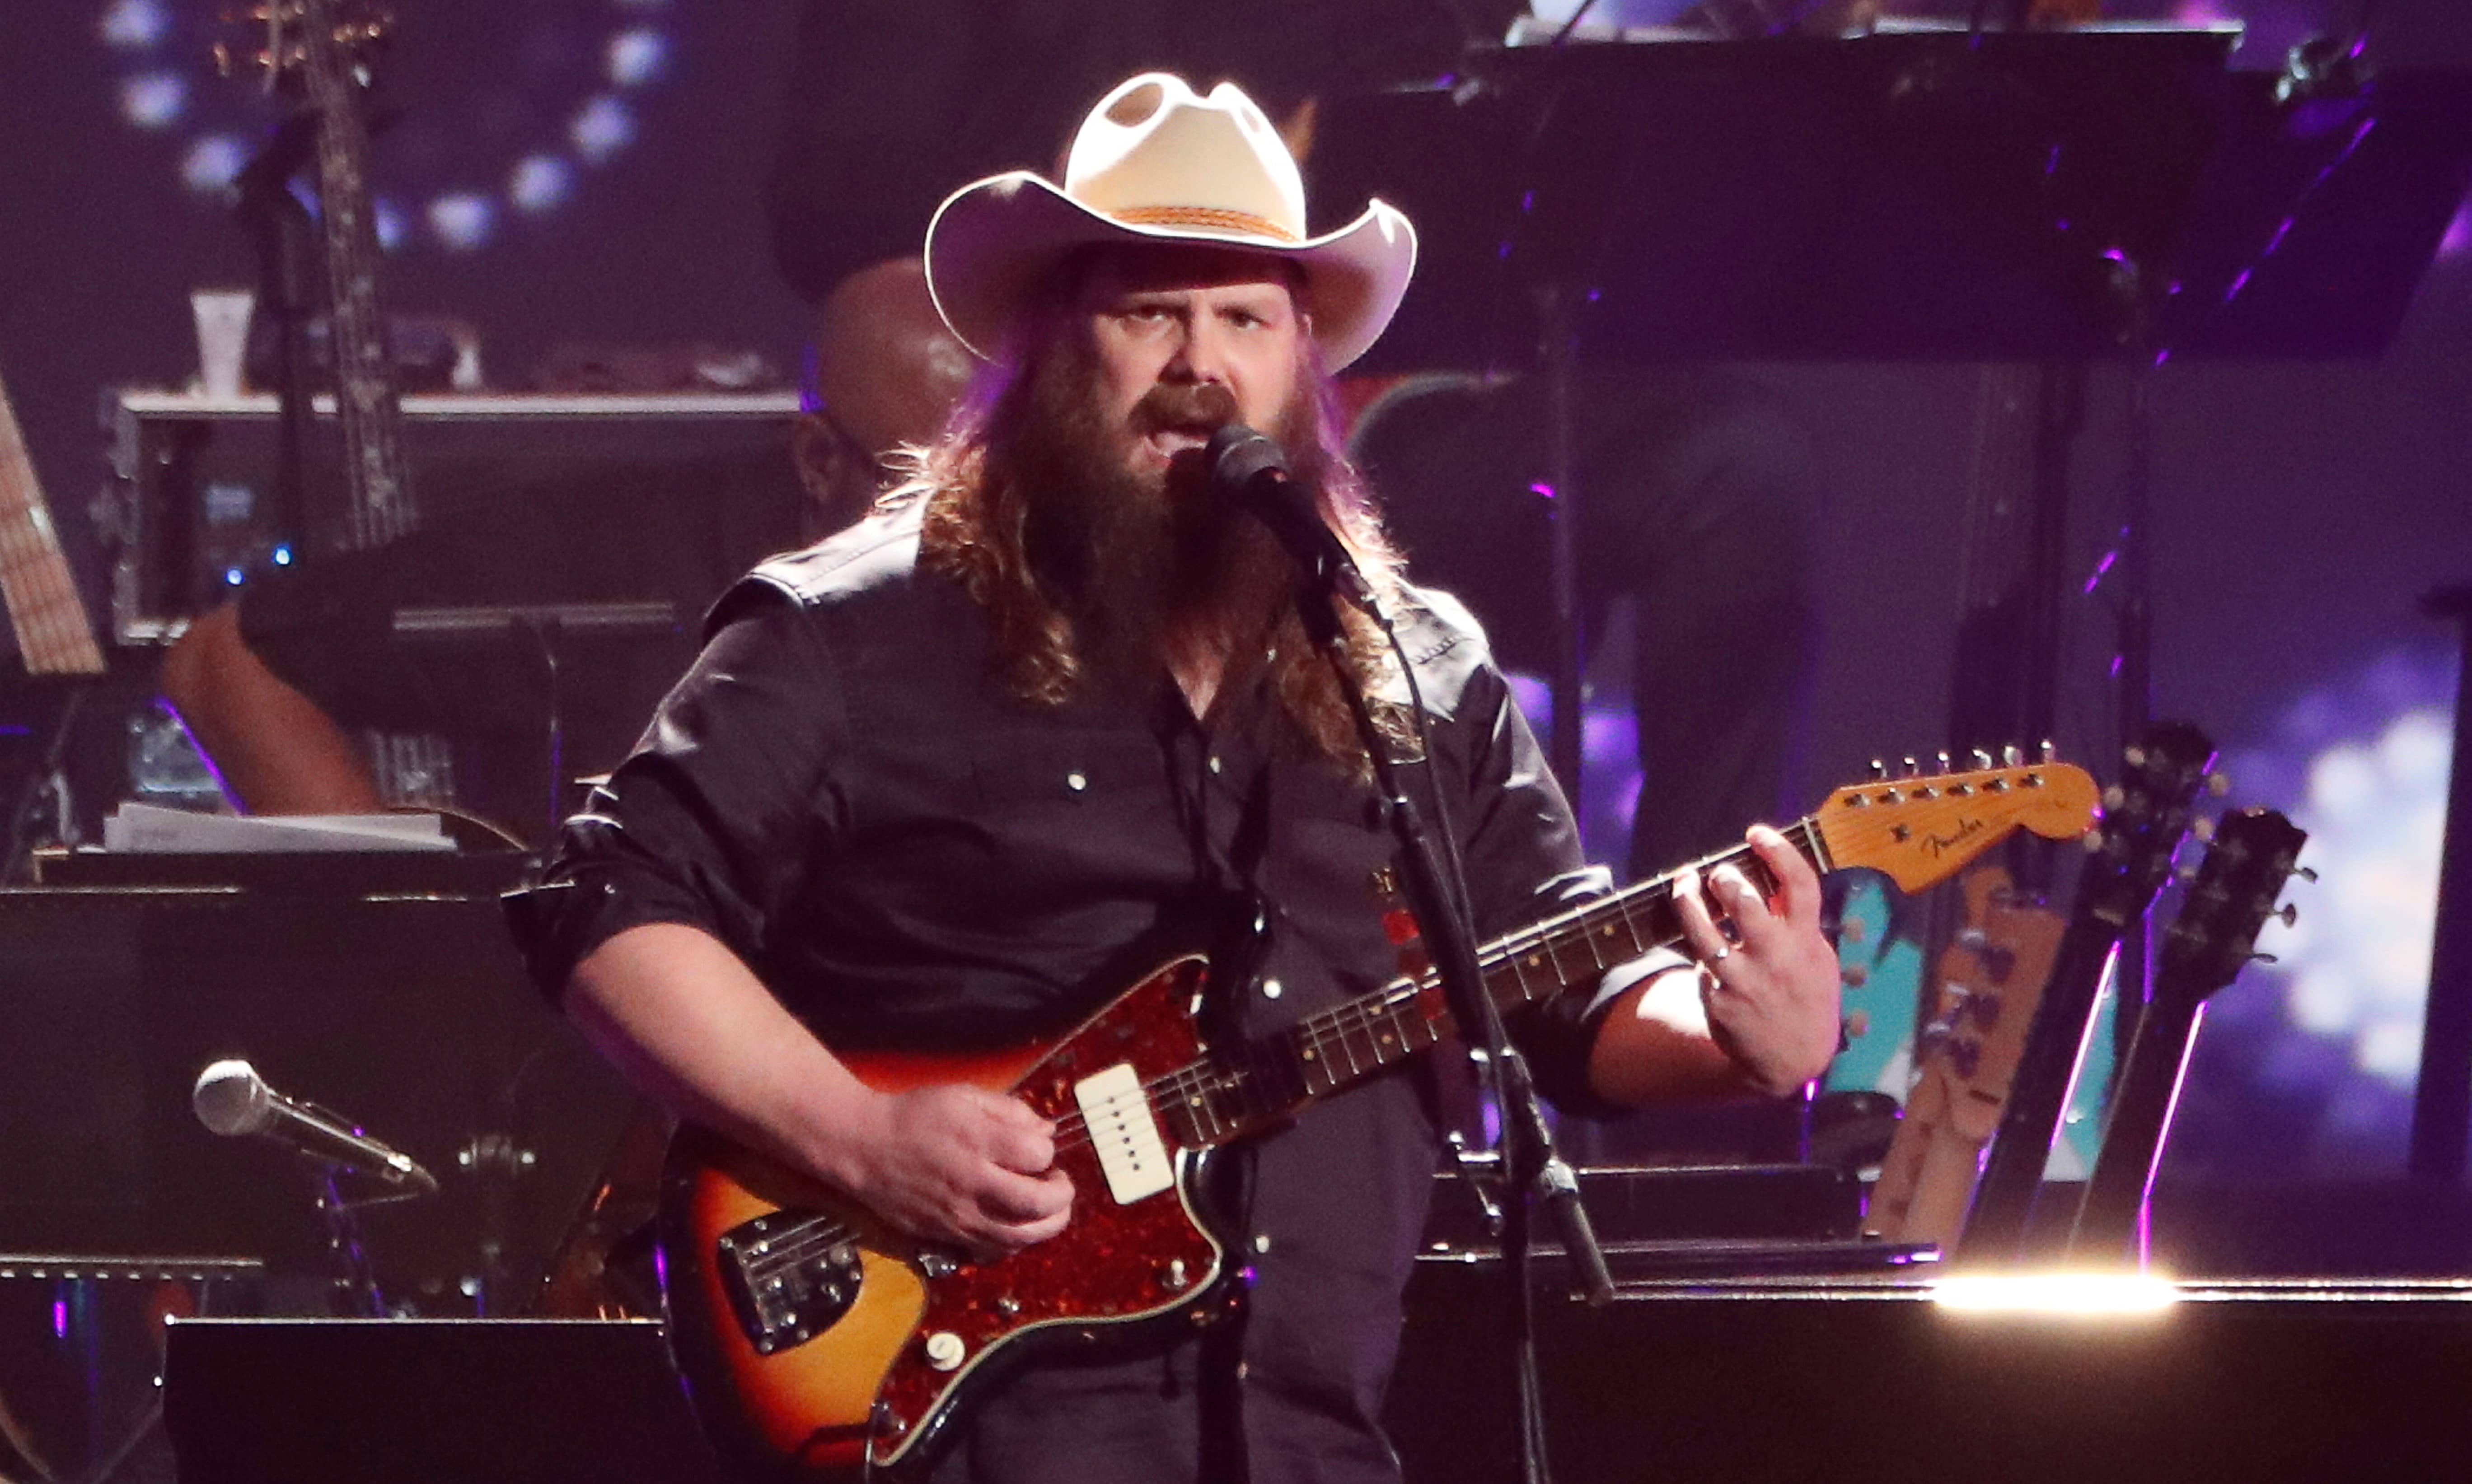 chris-stapleton-performs-during-a-gala-event-honoring-dolly-parton-as-the-musicares-person-of-the-year-in-los-angeles